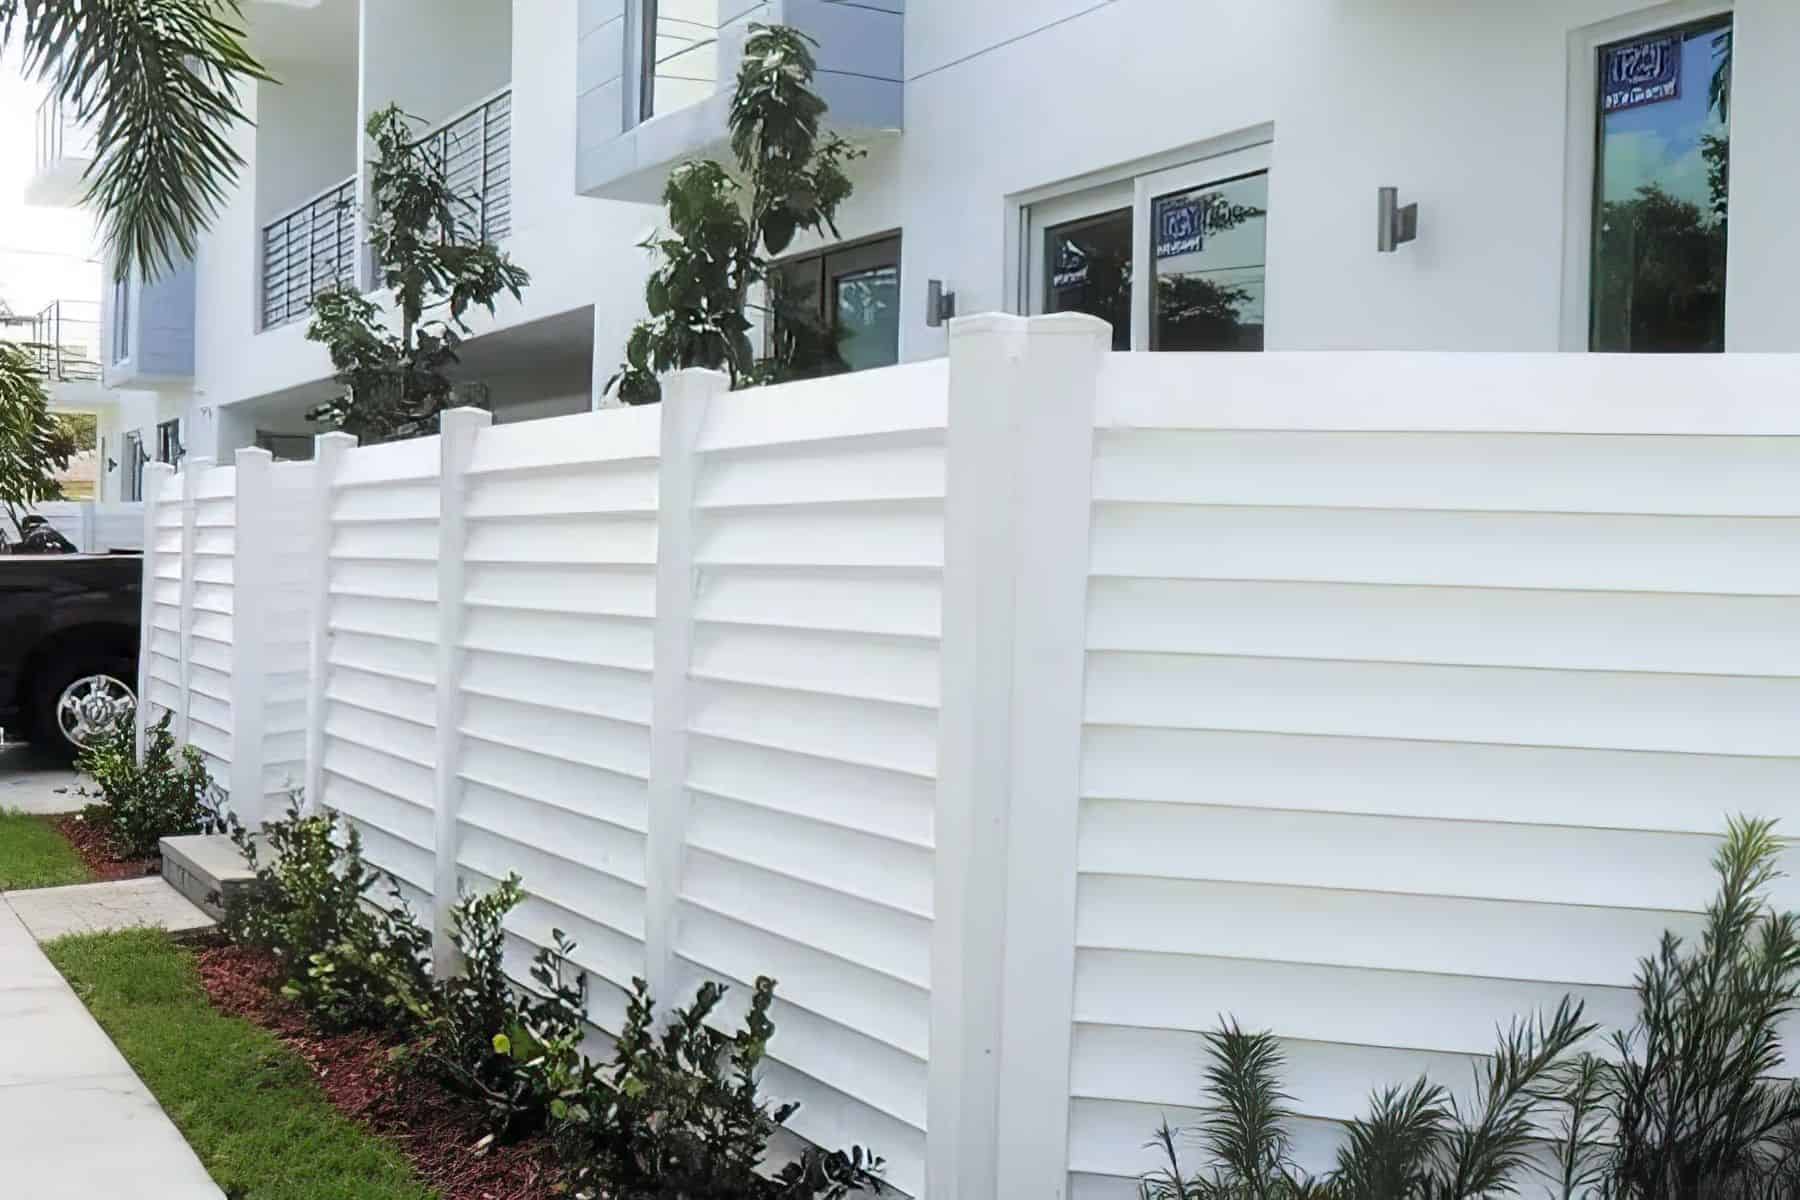 Louvered white vinyl semi-privacy fence separating the sidewalk and small patch of grass from the glass door entrance.